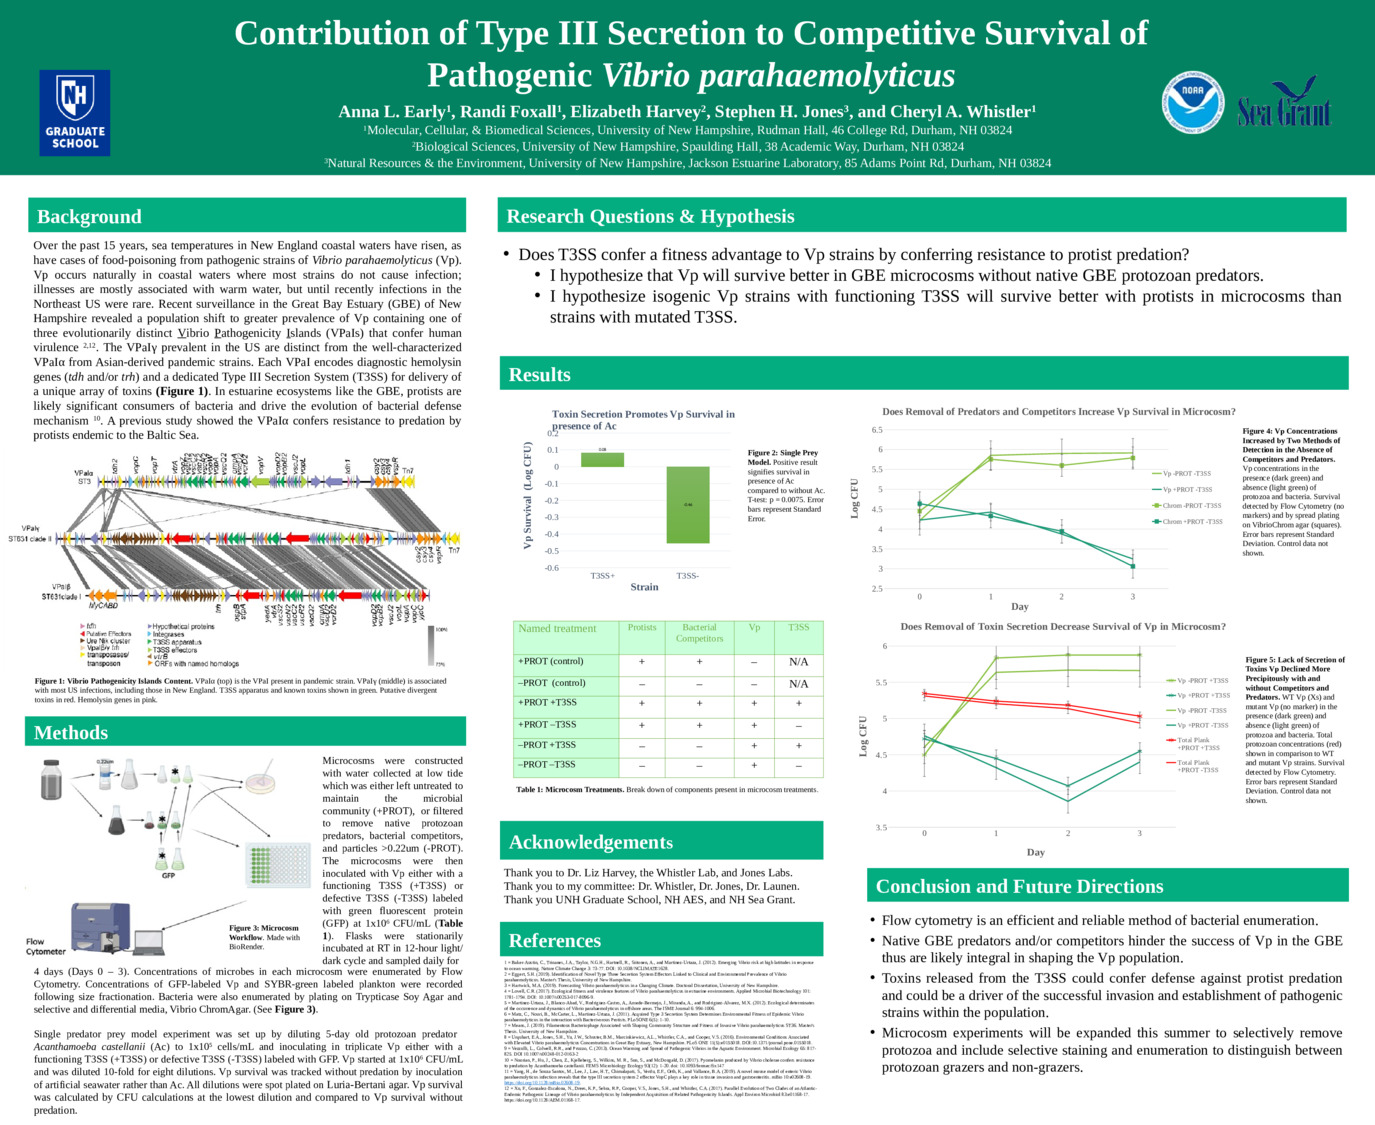 Contribution Of Type Iii Secretion To Competitive Survival Of Pathogenic Vibrio Parahaemolyticus by ae1092